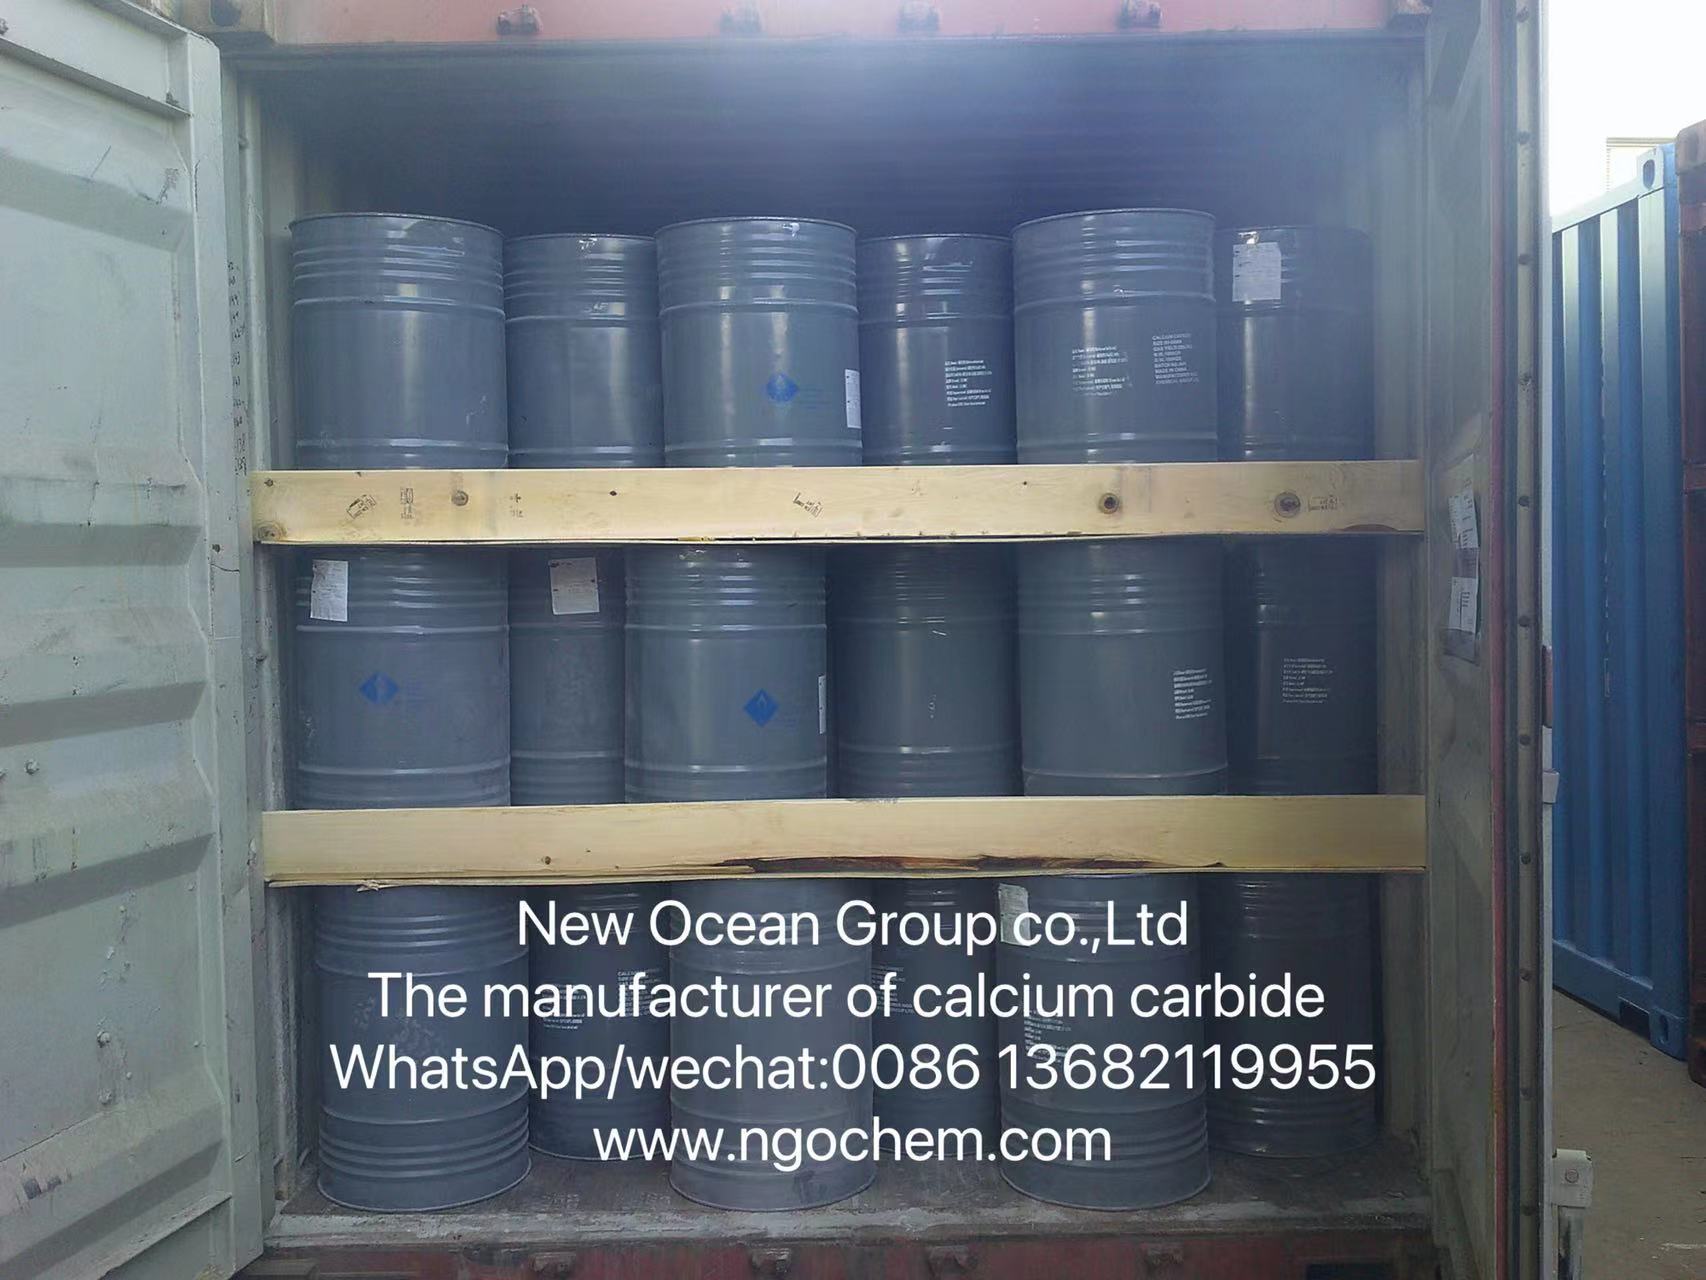 The price of calcium carbide in northwest China temporarily stabilized on February 15